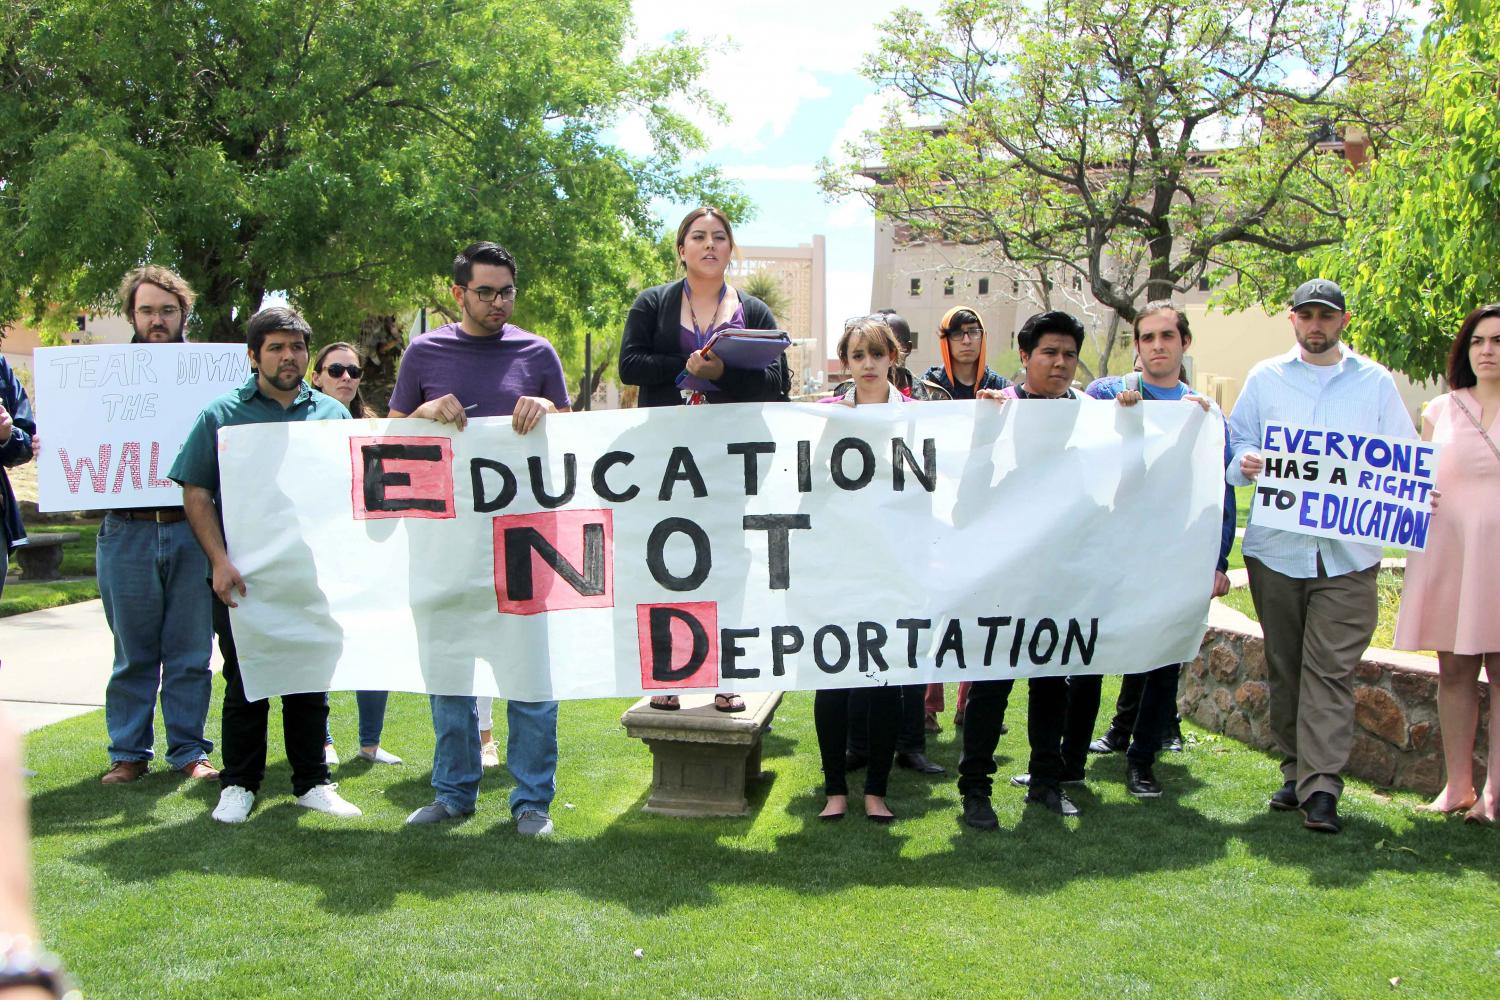 Education Across Borders seeks to use the same energy that Education Not Deportation (E.N.D.) used, but Education Across Borders promises to be more policy-driven 